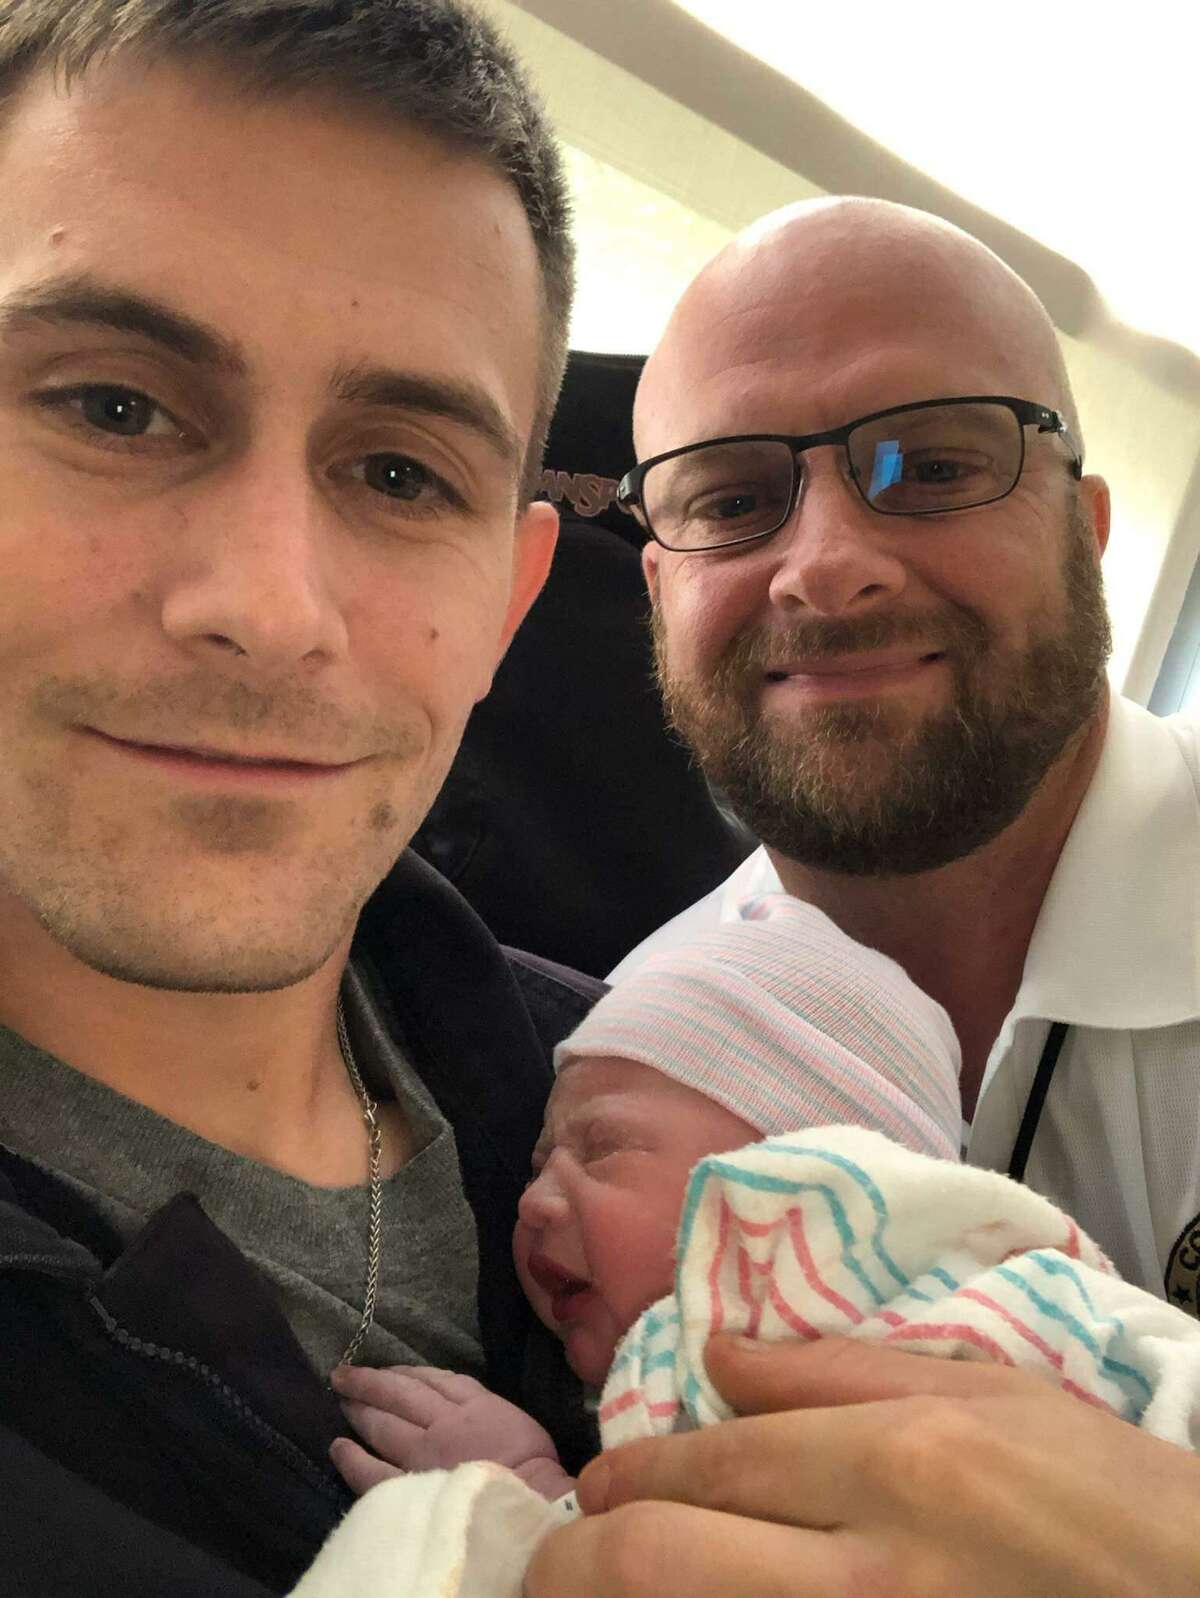 Brandon Hayden, left, and his father, Constable Kenneth "Rowdy" Hayden, pose for a picture with newborn Autumn Rene Hayden. The daughter of Brandon Hayden, she is Constable Hayden's first grandchild.